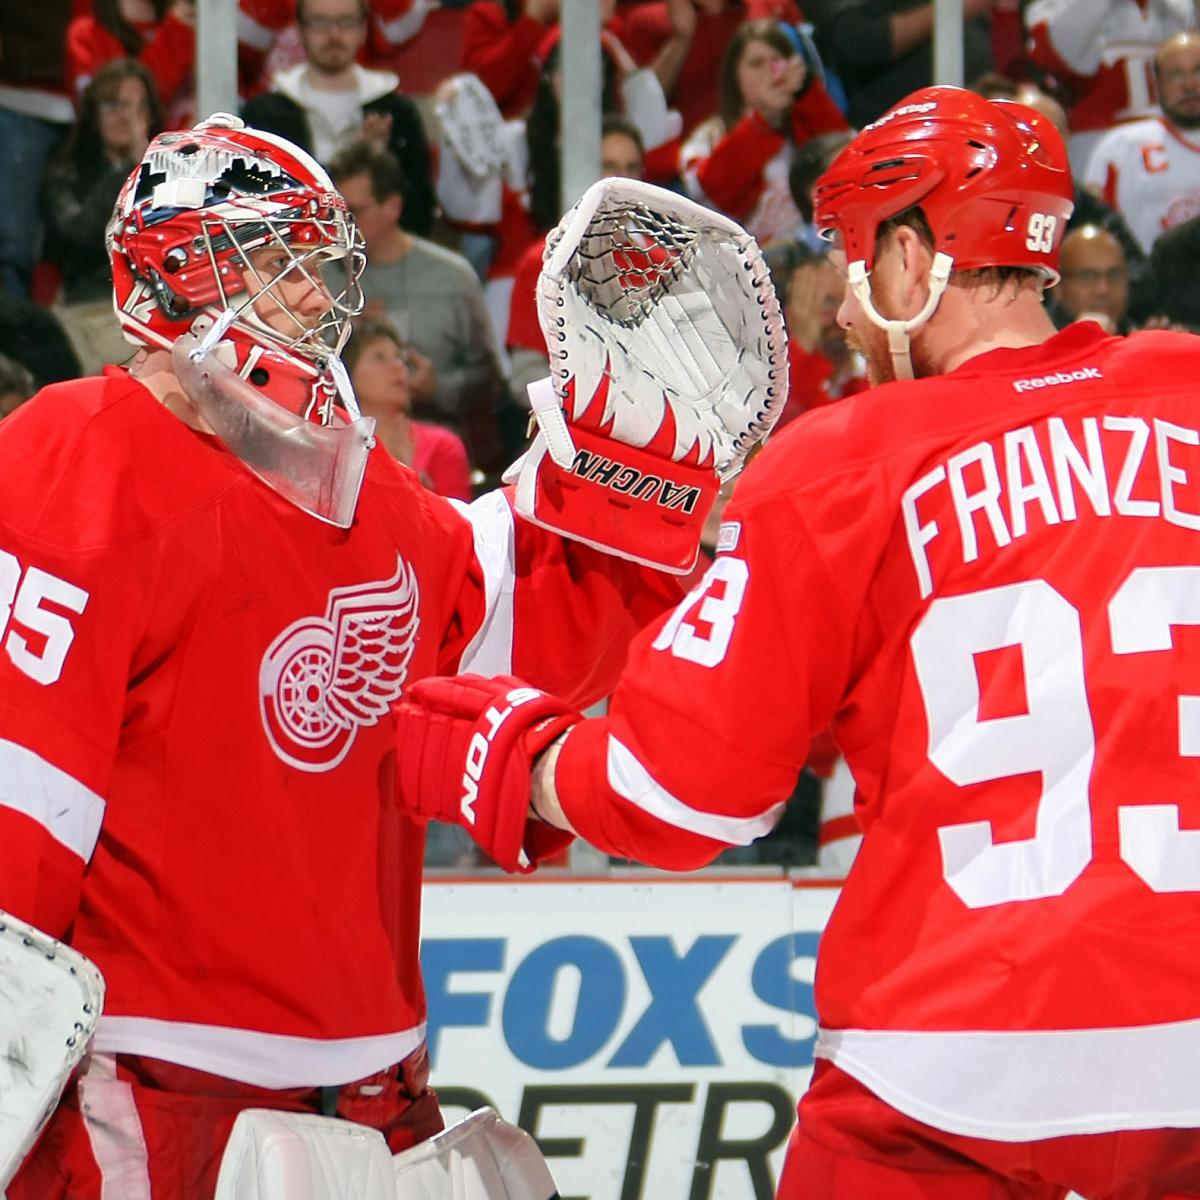 Detroit Red Wings ranked fifth, seventh among ESPN's top NHL dynasties